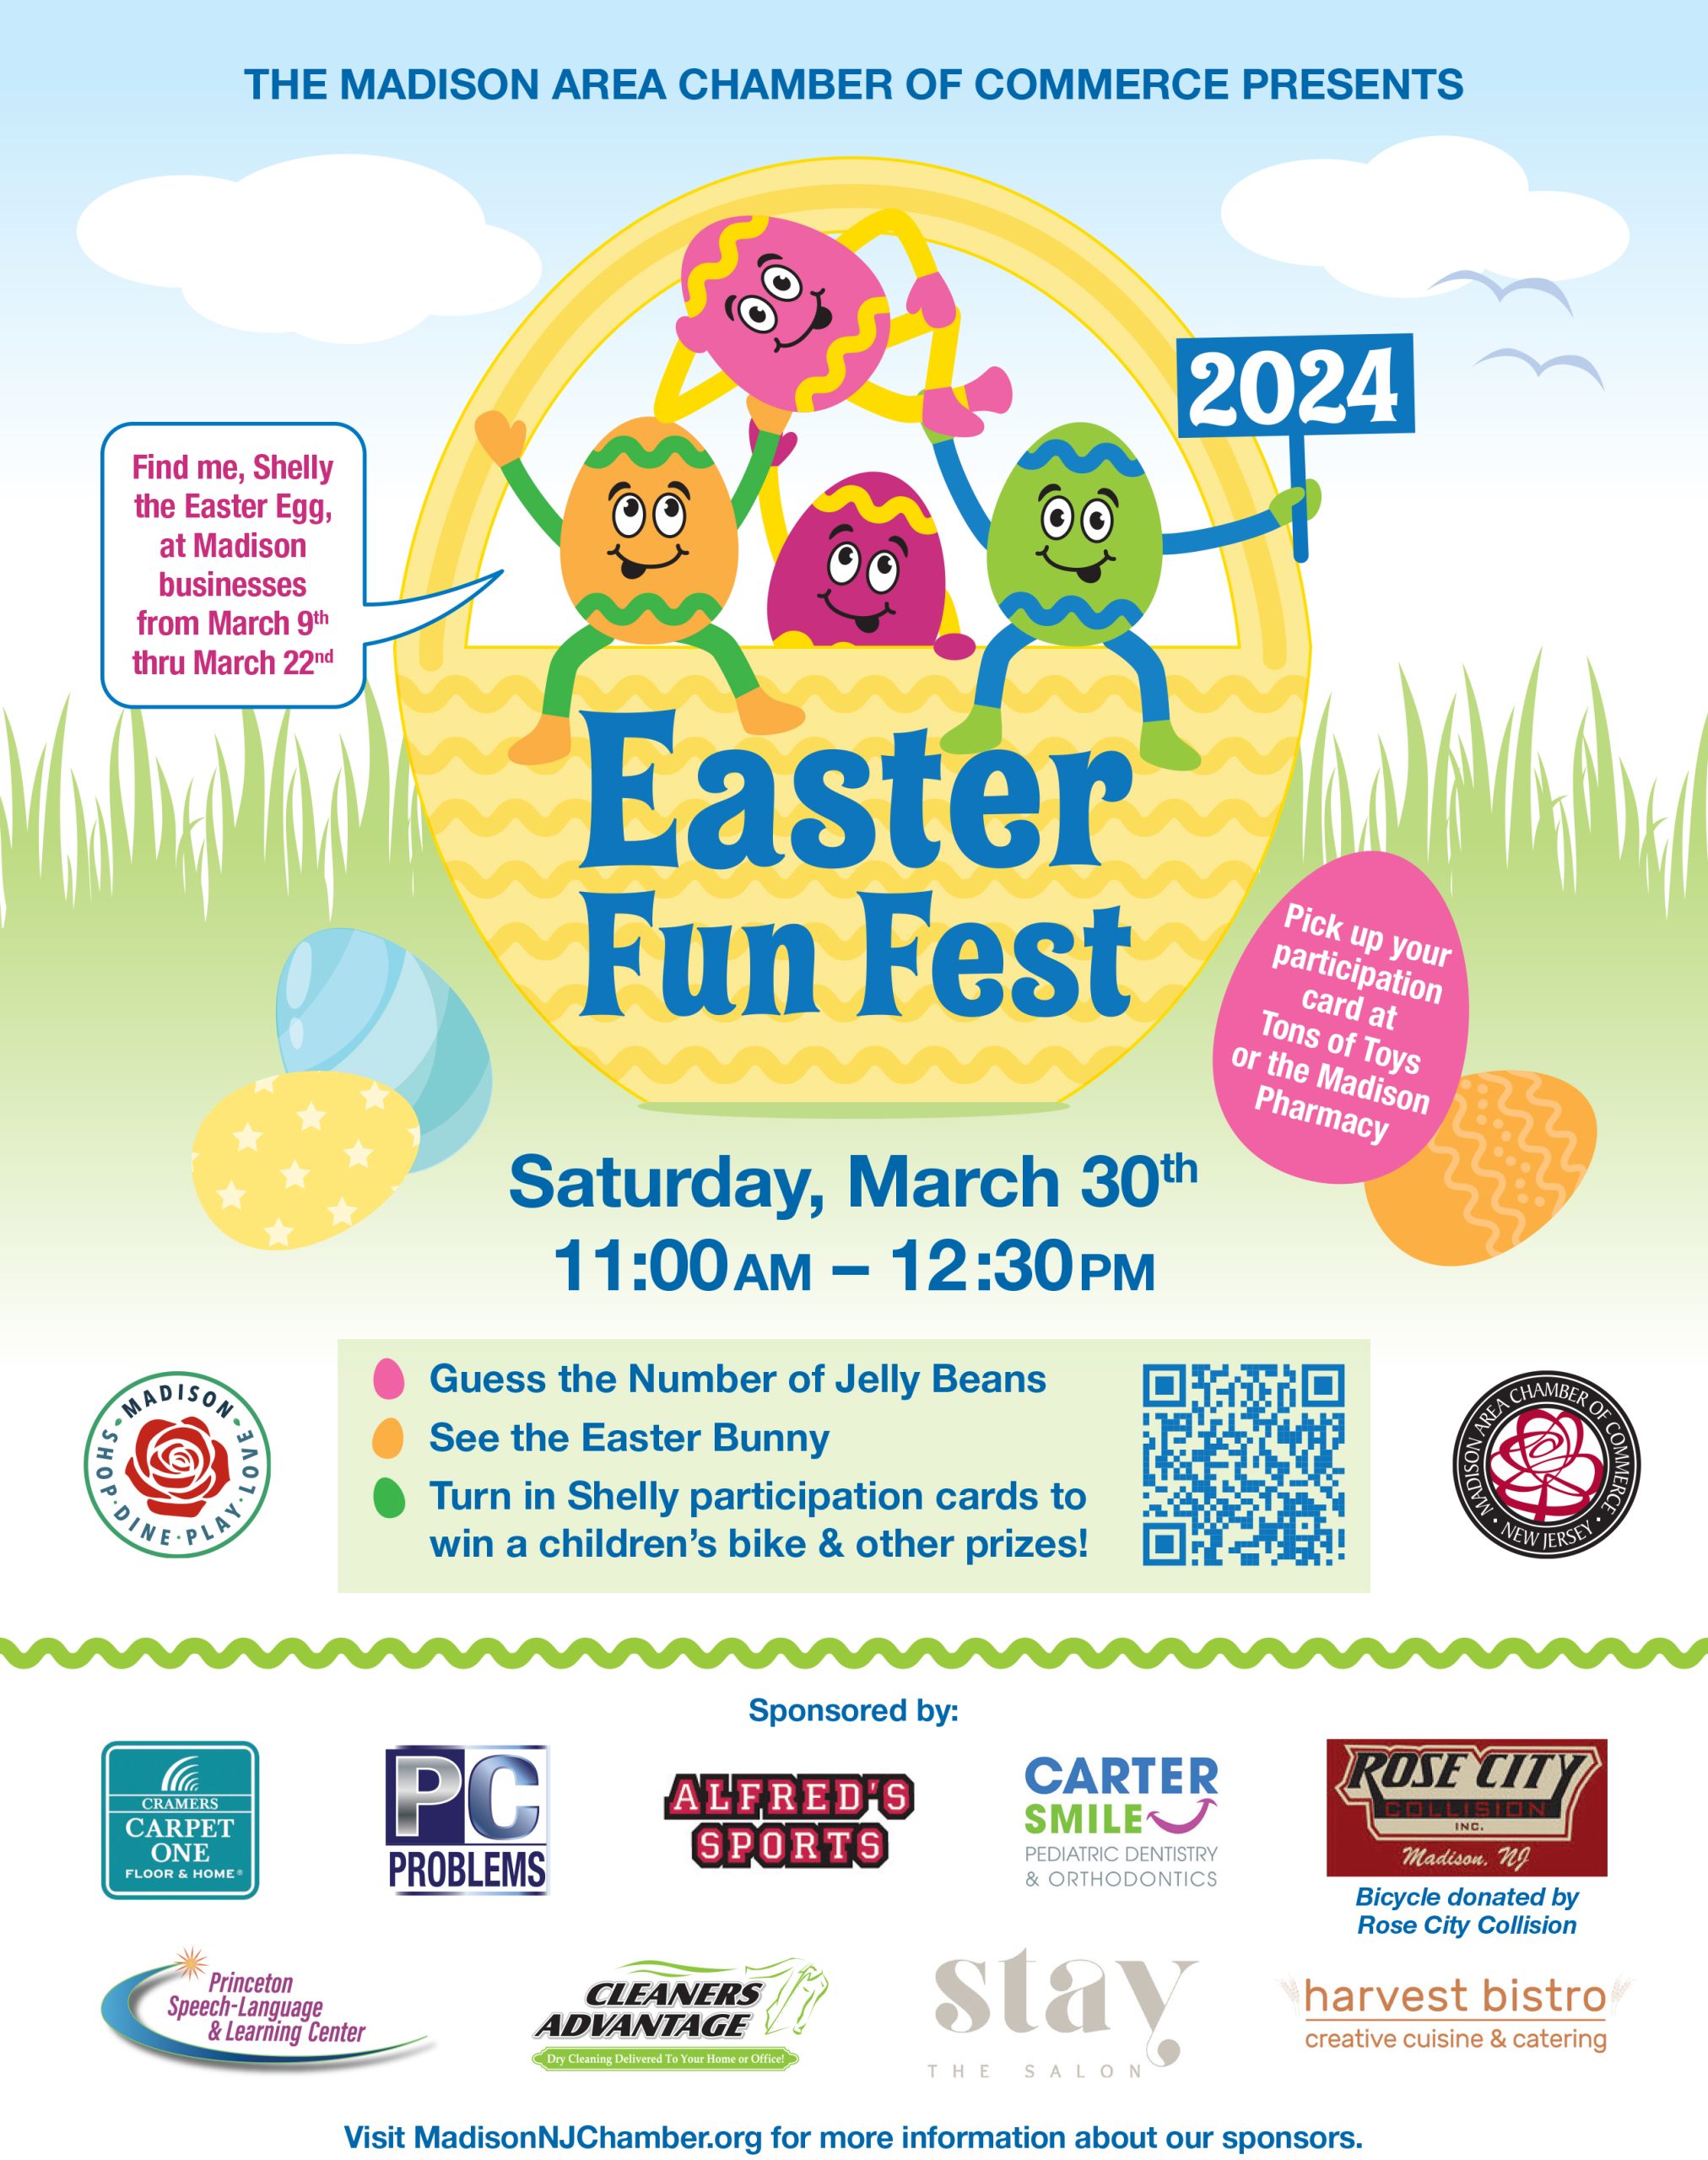 Annual Easter Fun Fest Rescheduled to March 30th